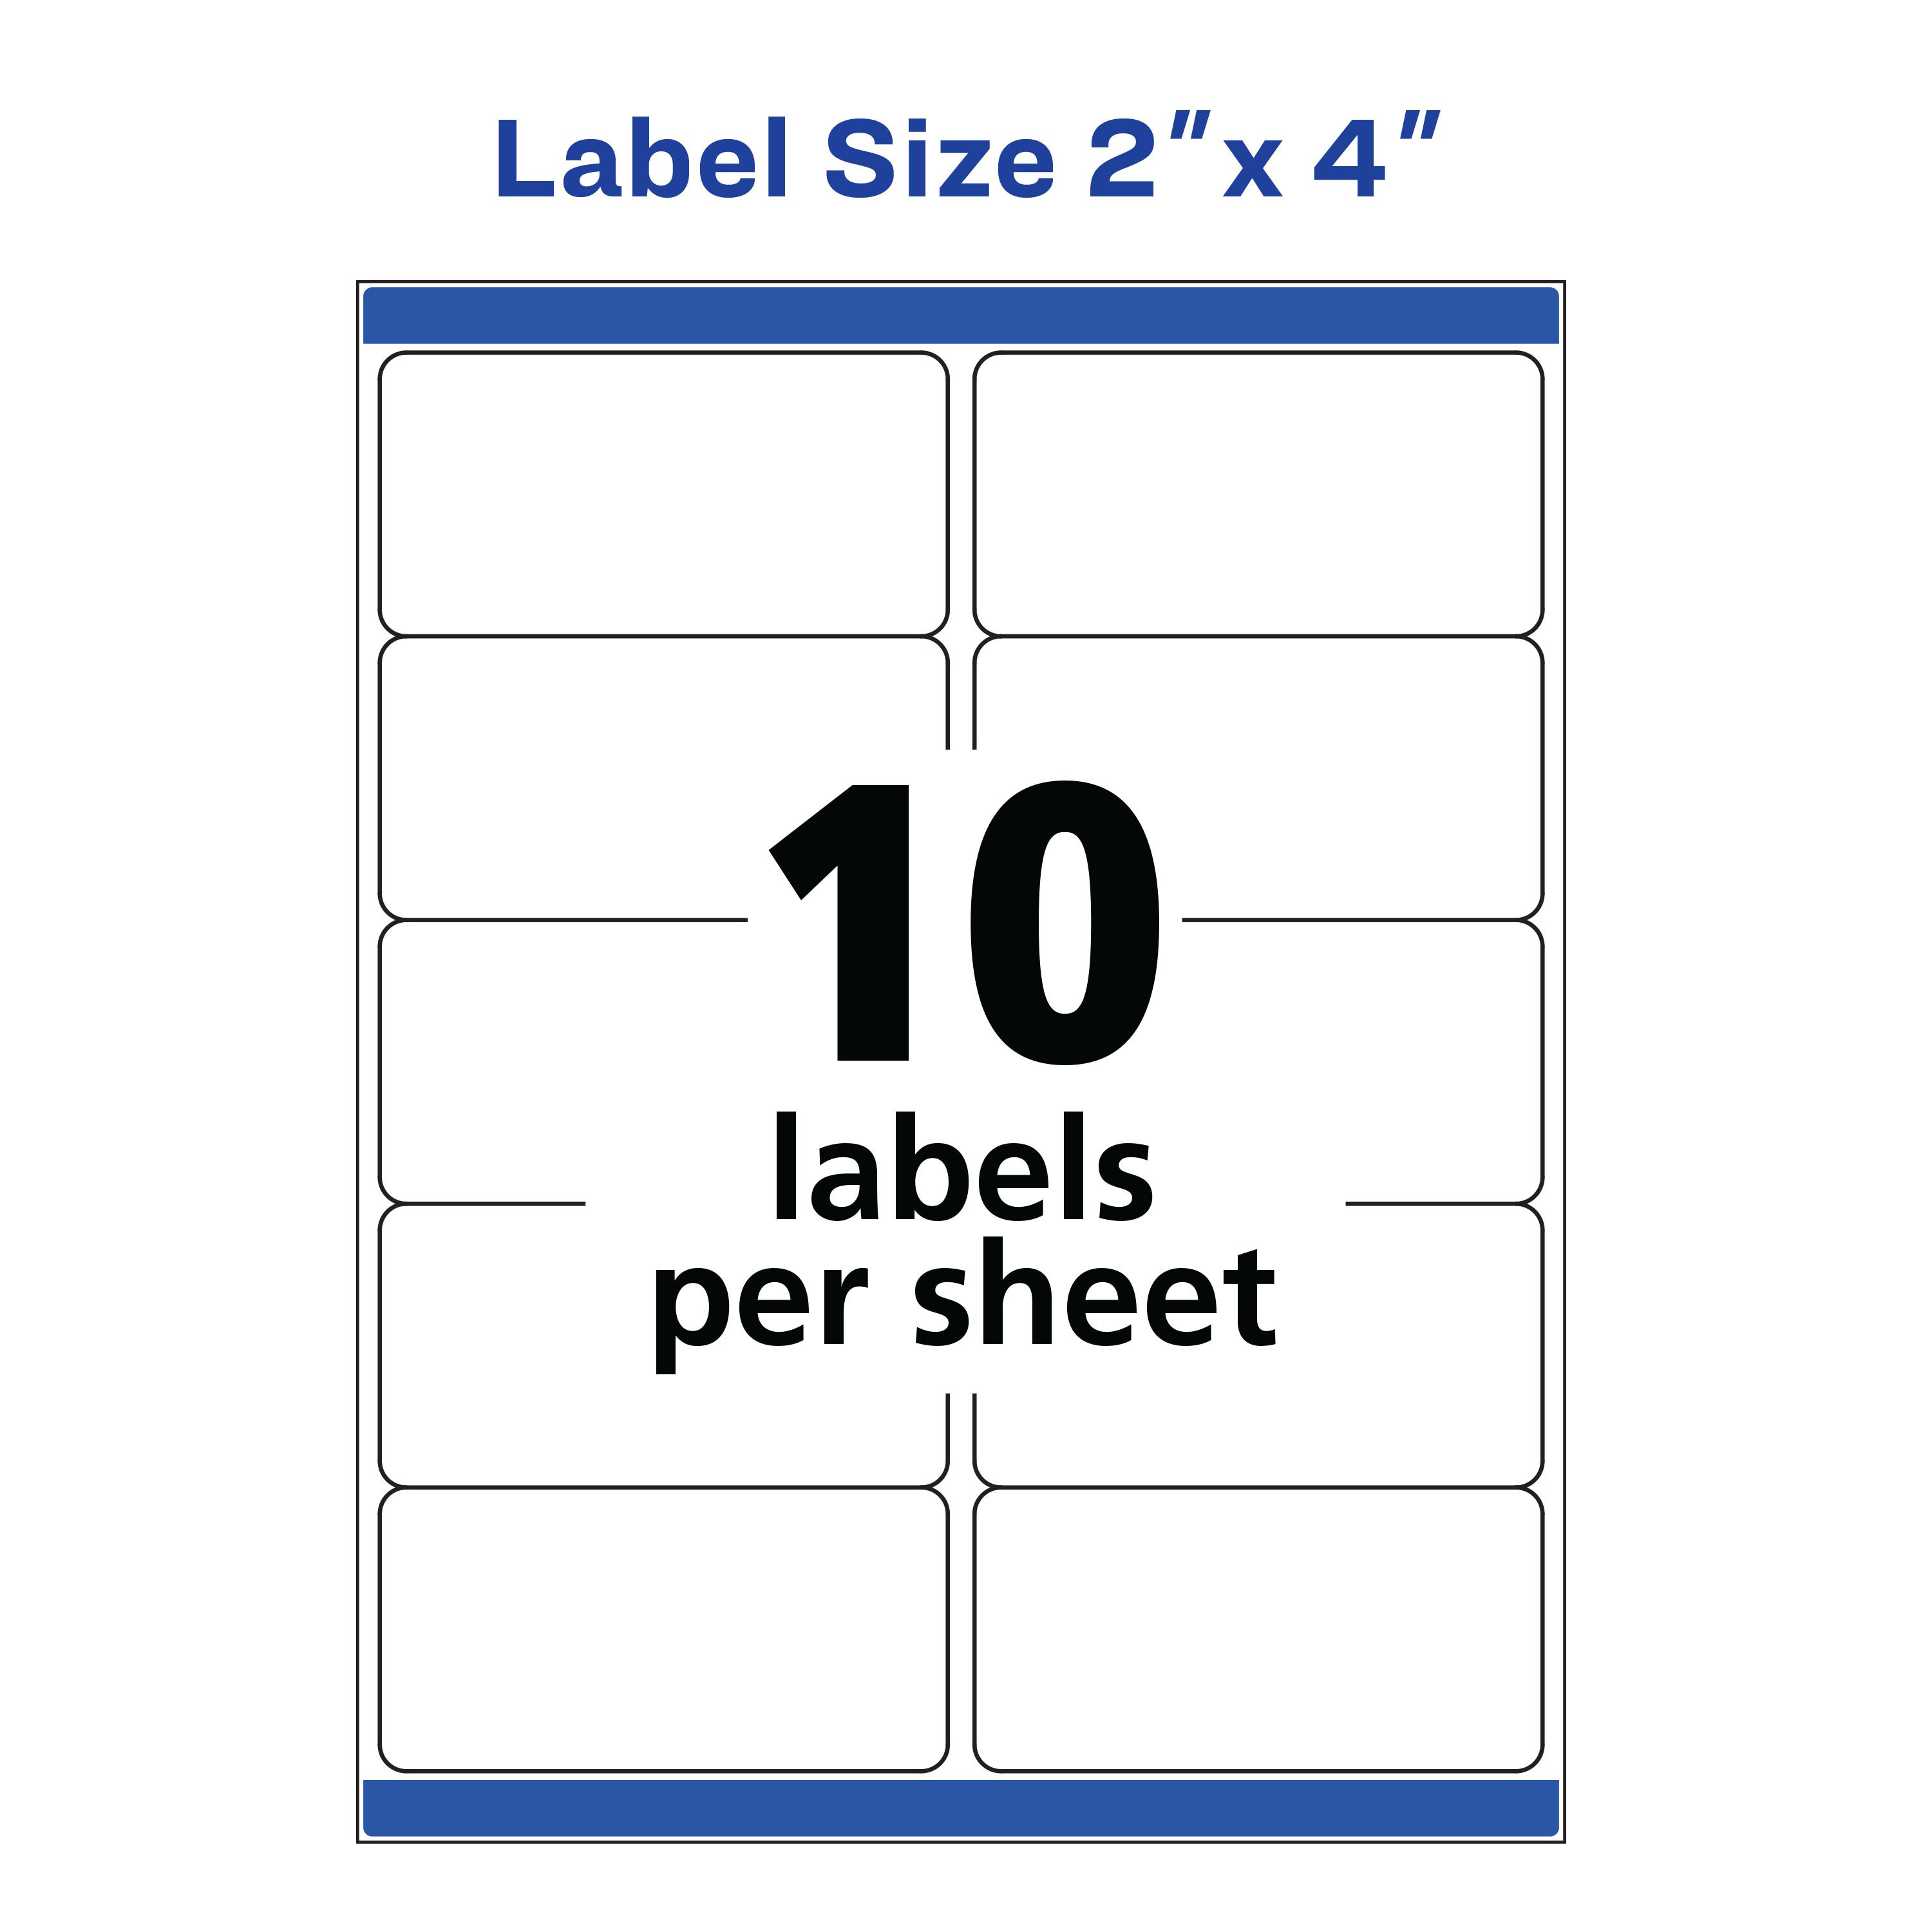 Avery TrueBlock Shipping Labels, Sure Feed Technology, Permanent Adhesive, 2" x 4", 250 Labels (8163) - image 5 of 9